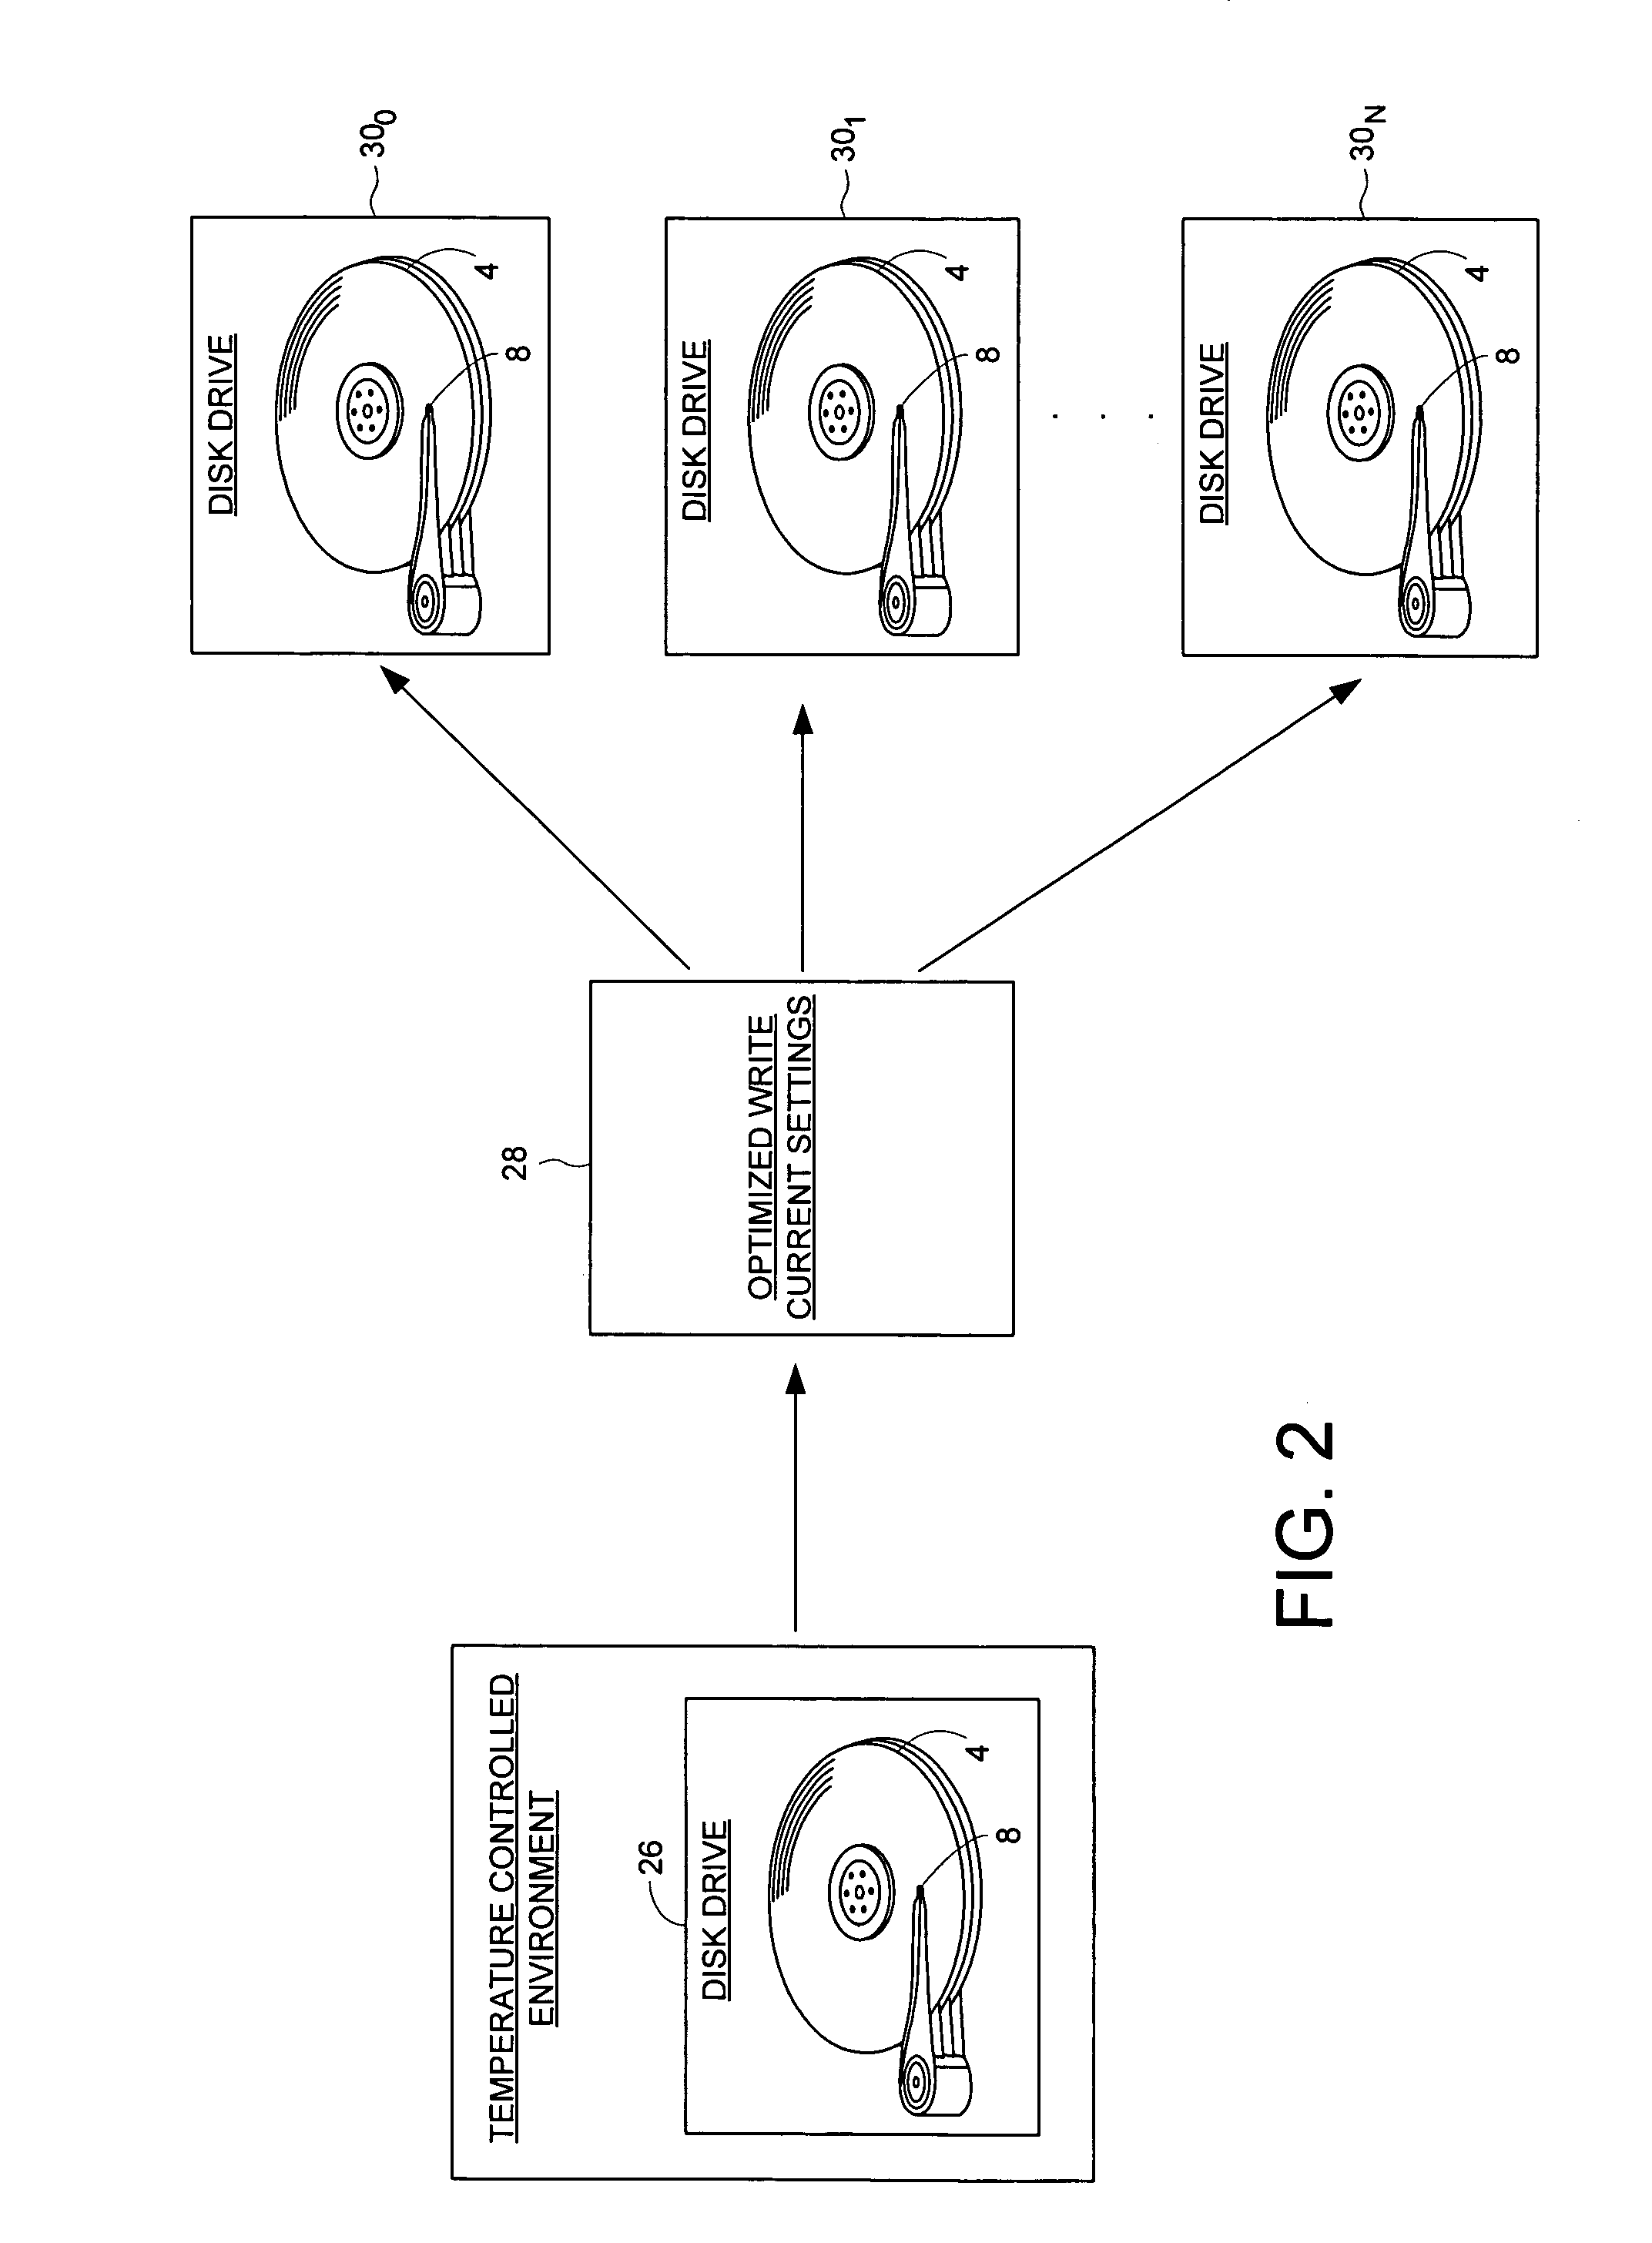 Disk drive for optimizing write current settings relative to drive operating characteristics and ambient temperature readings